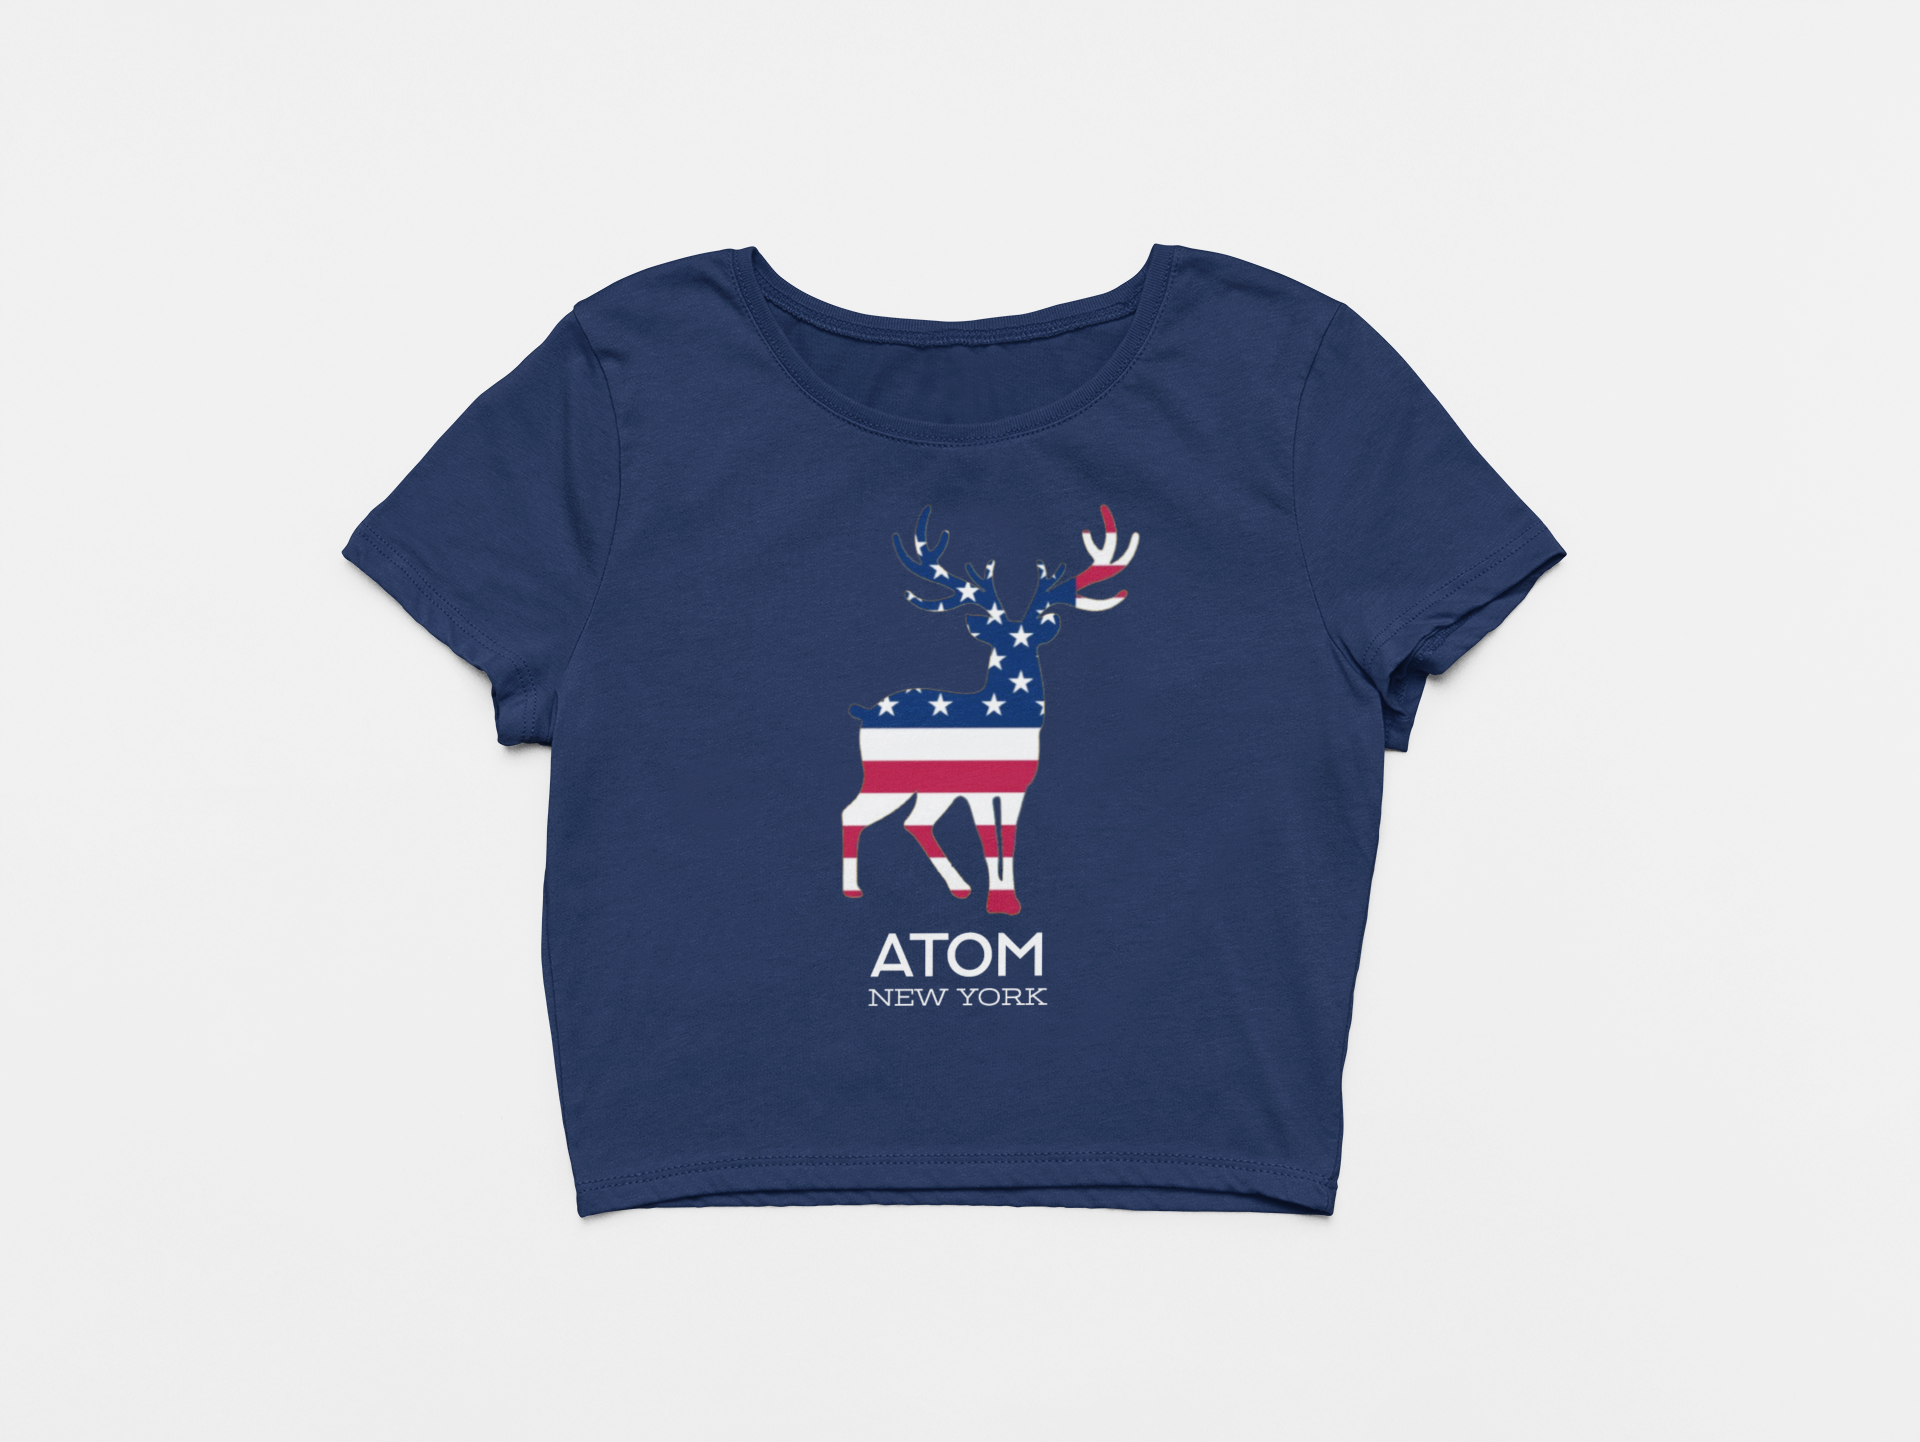 ATOM Signature American Flag Navy Blue Crop Top For Women